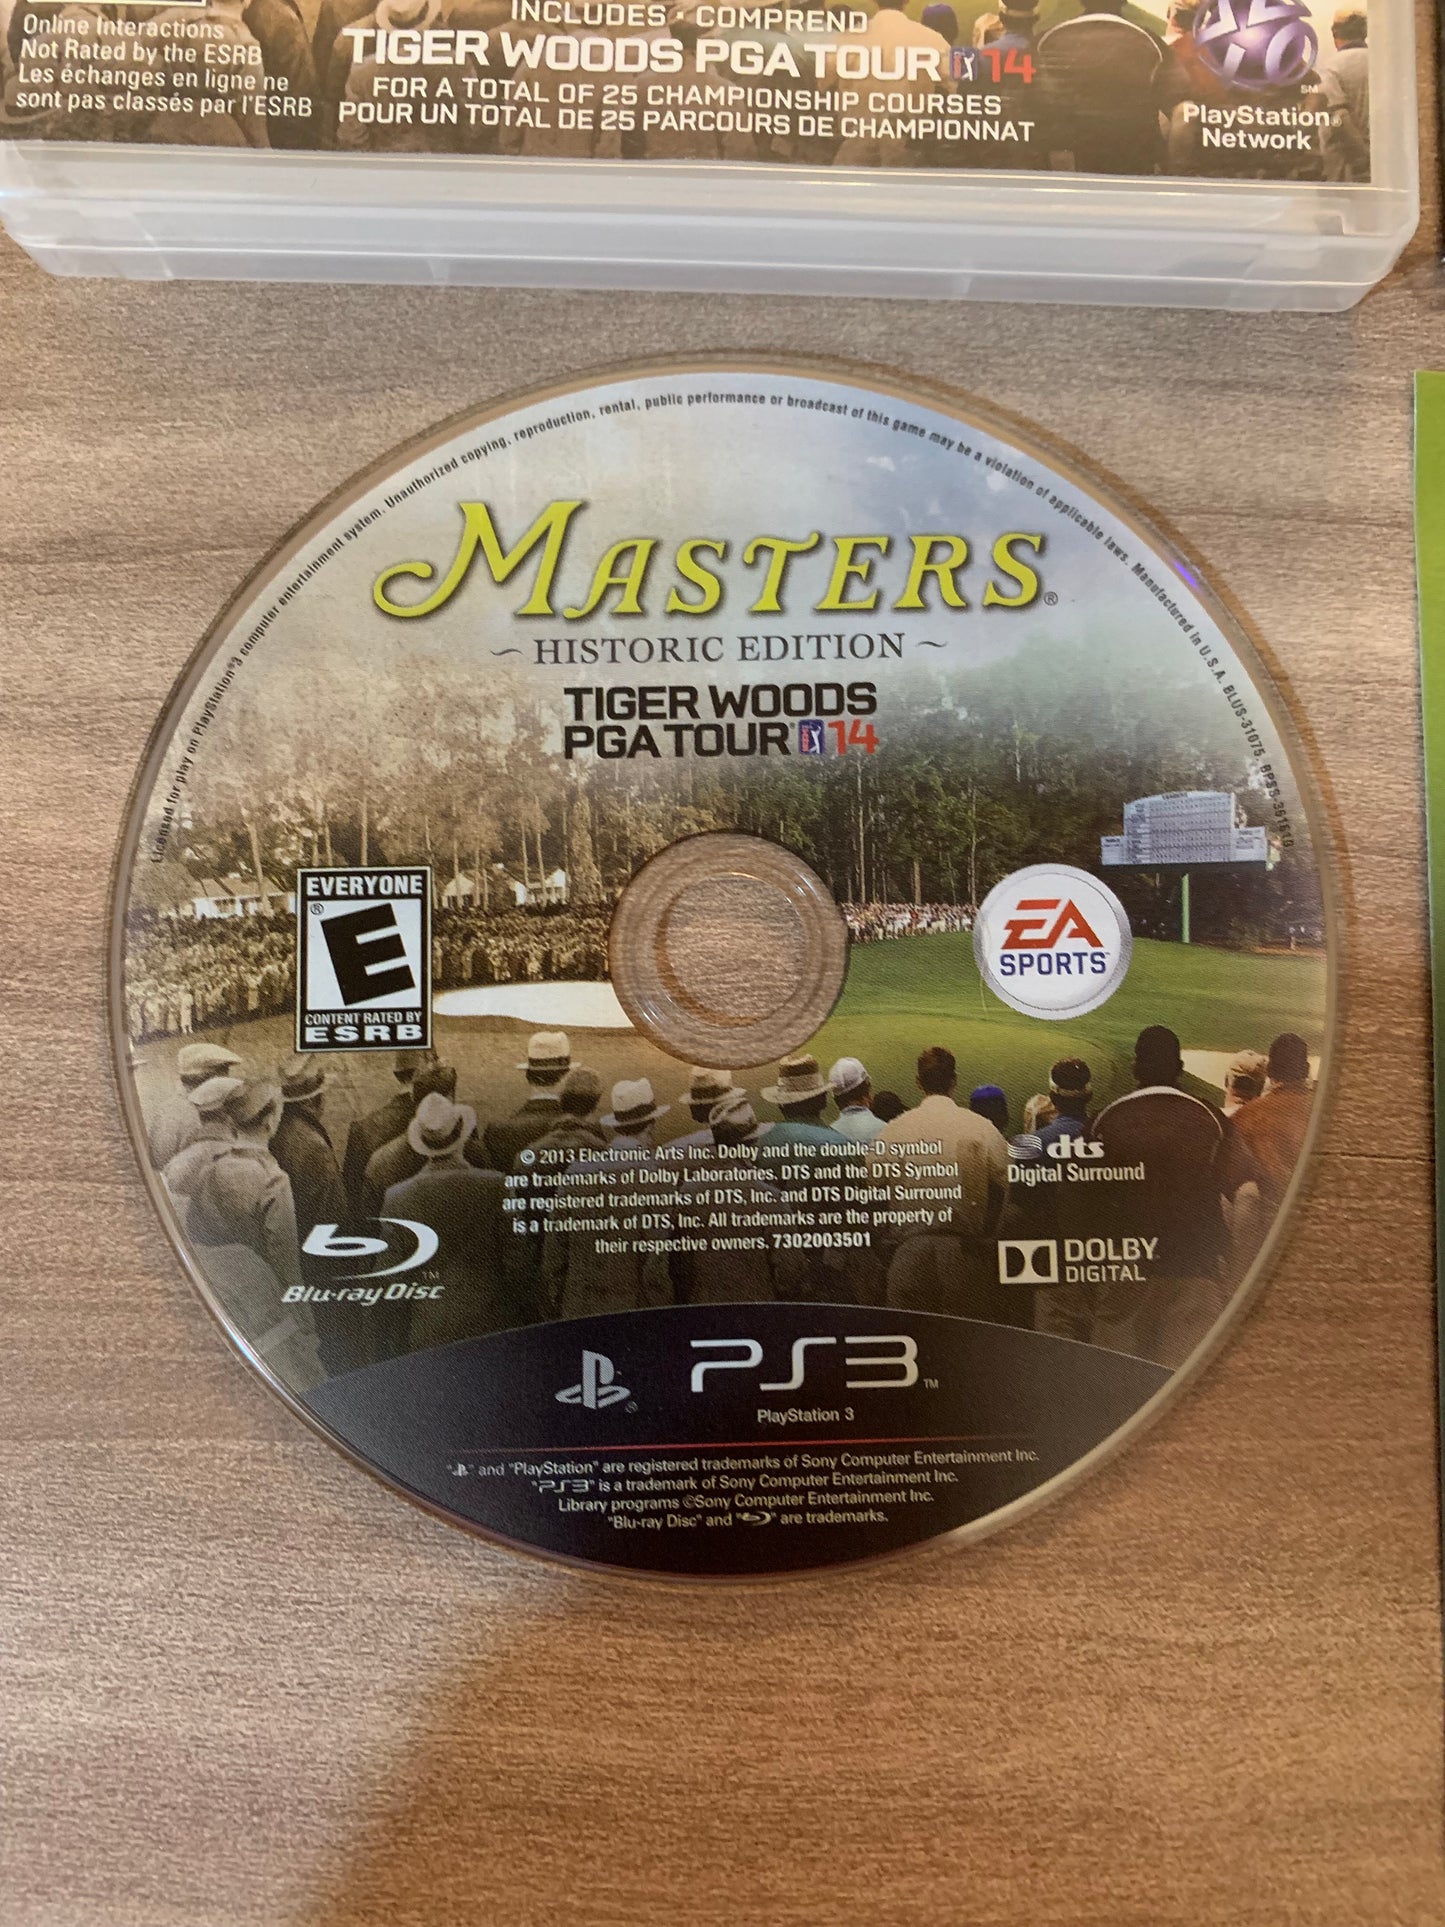 SONY PLAYSTATiON 3 [PS3] | TiGER WOODS PGA TOUR 14 MASTERS | HiSTORiC EDiTiON